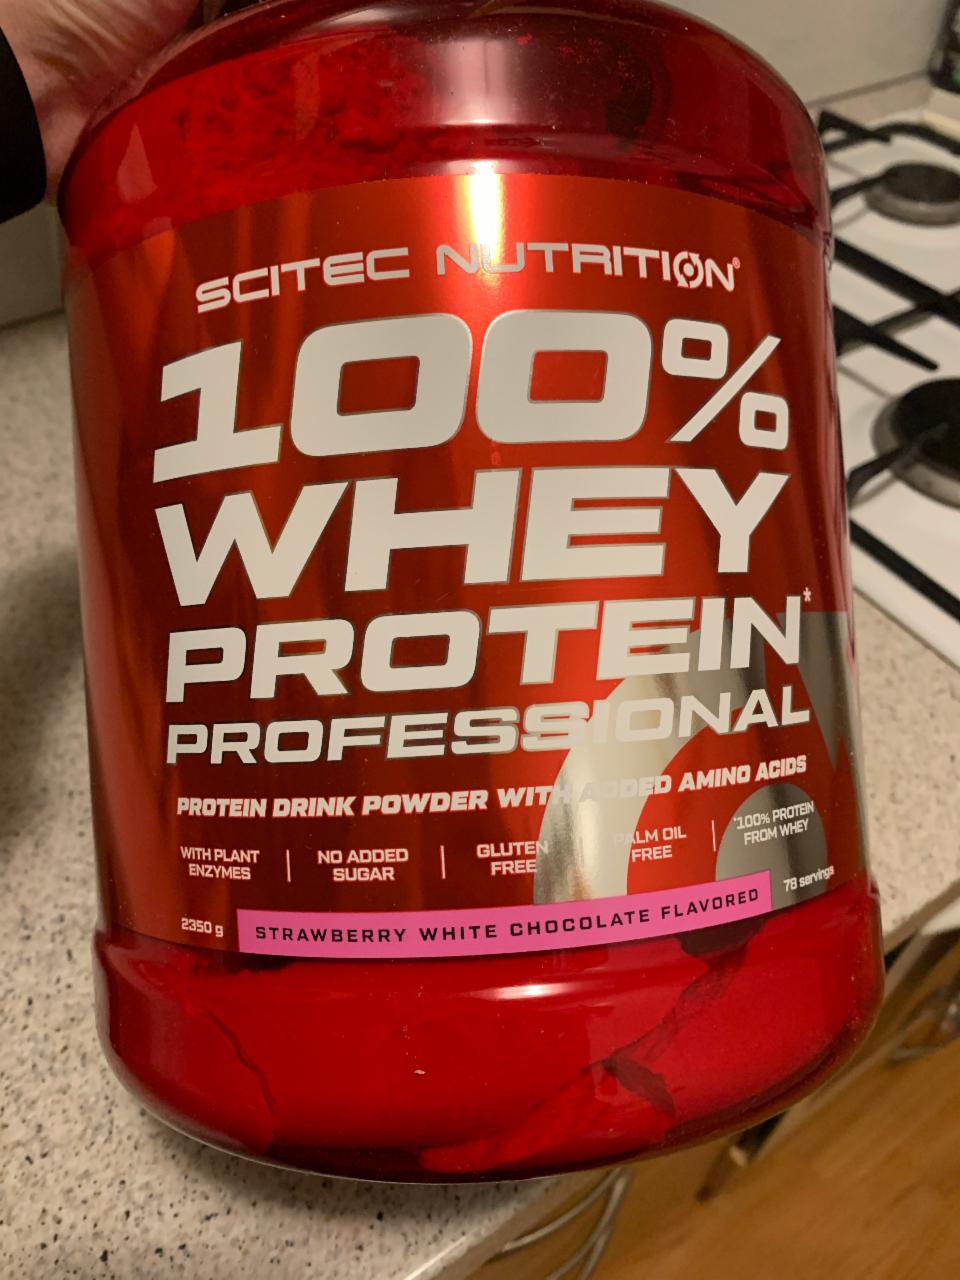 Képek - 100% whey protein professional Strawberry white chocolate flavored Scitec Nutrition